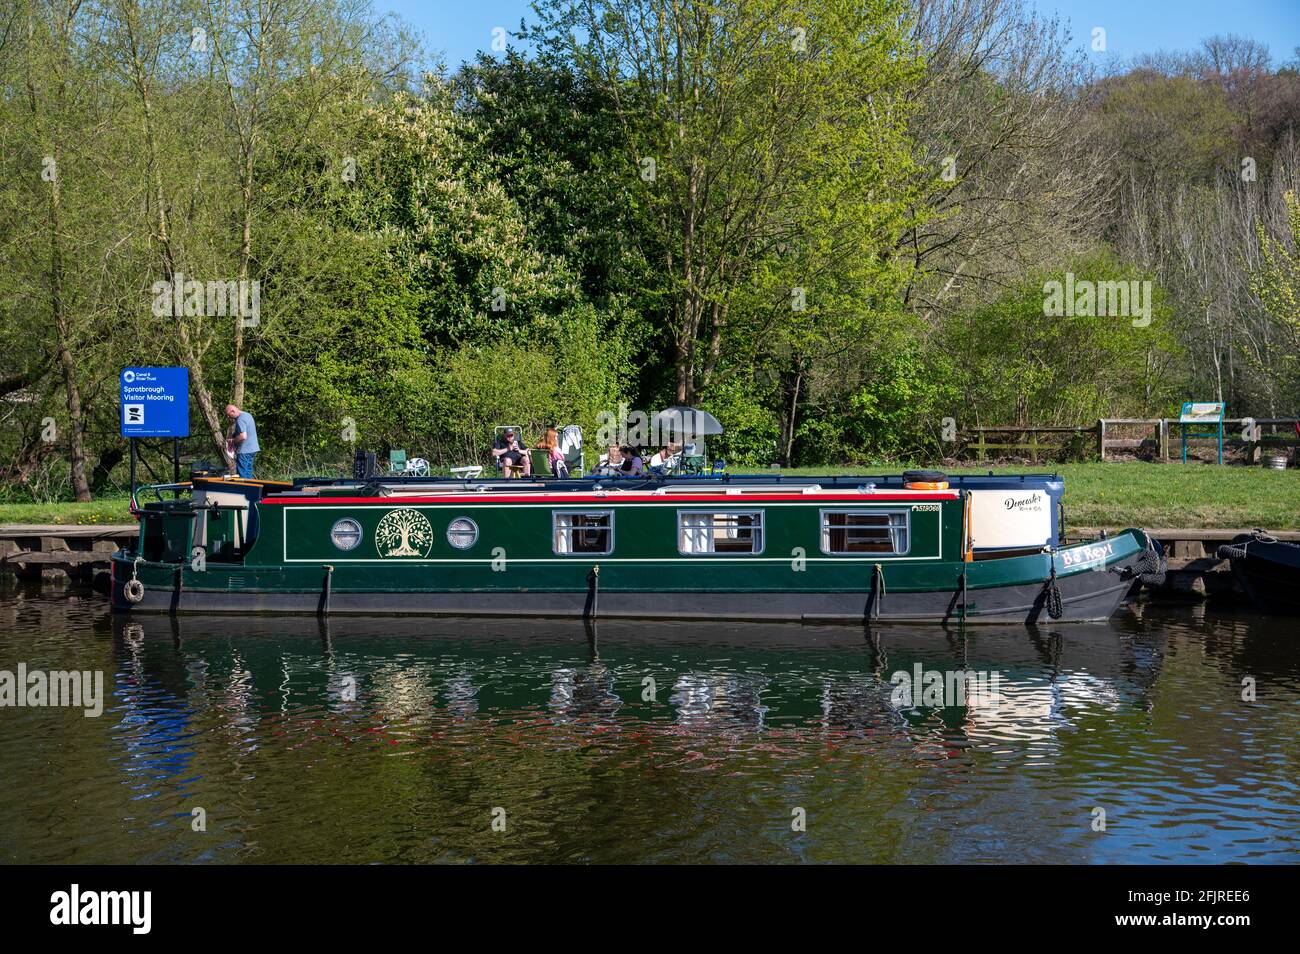 Pleasure boats on the South Yorkshire Navigational Canal, UK Stock Photo